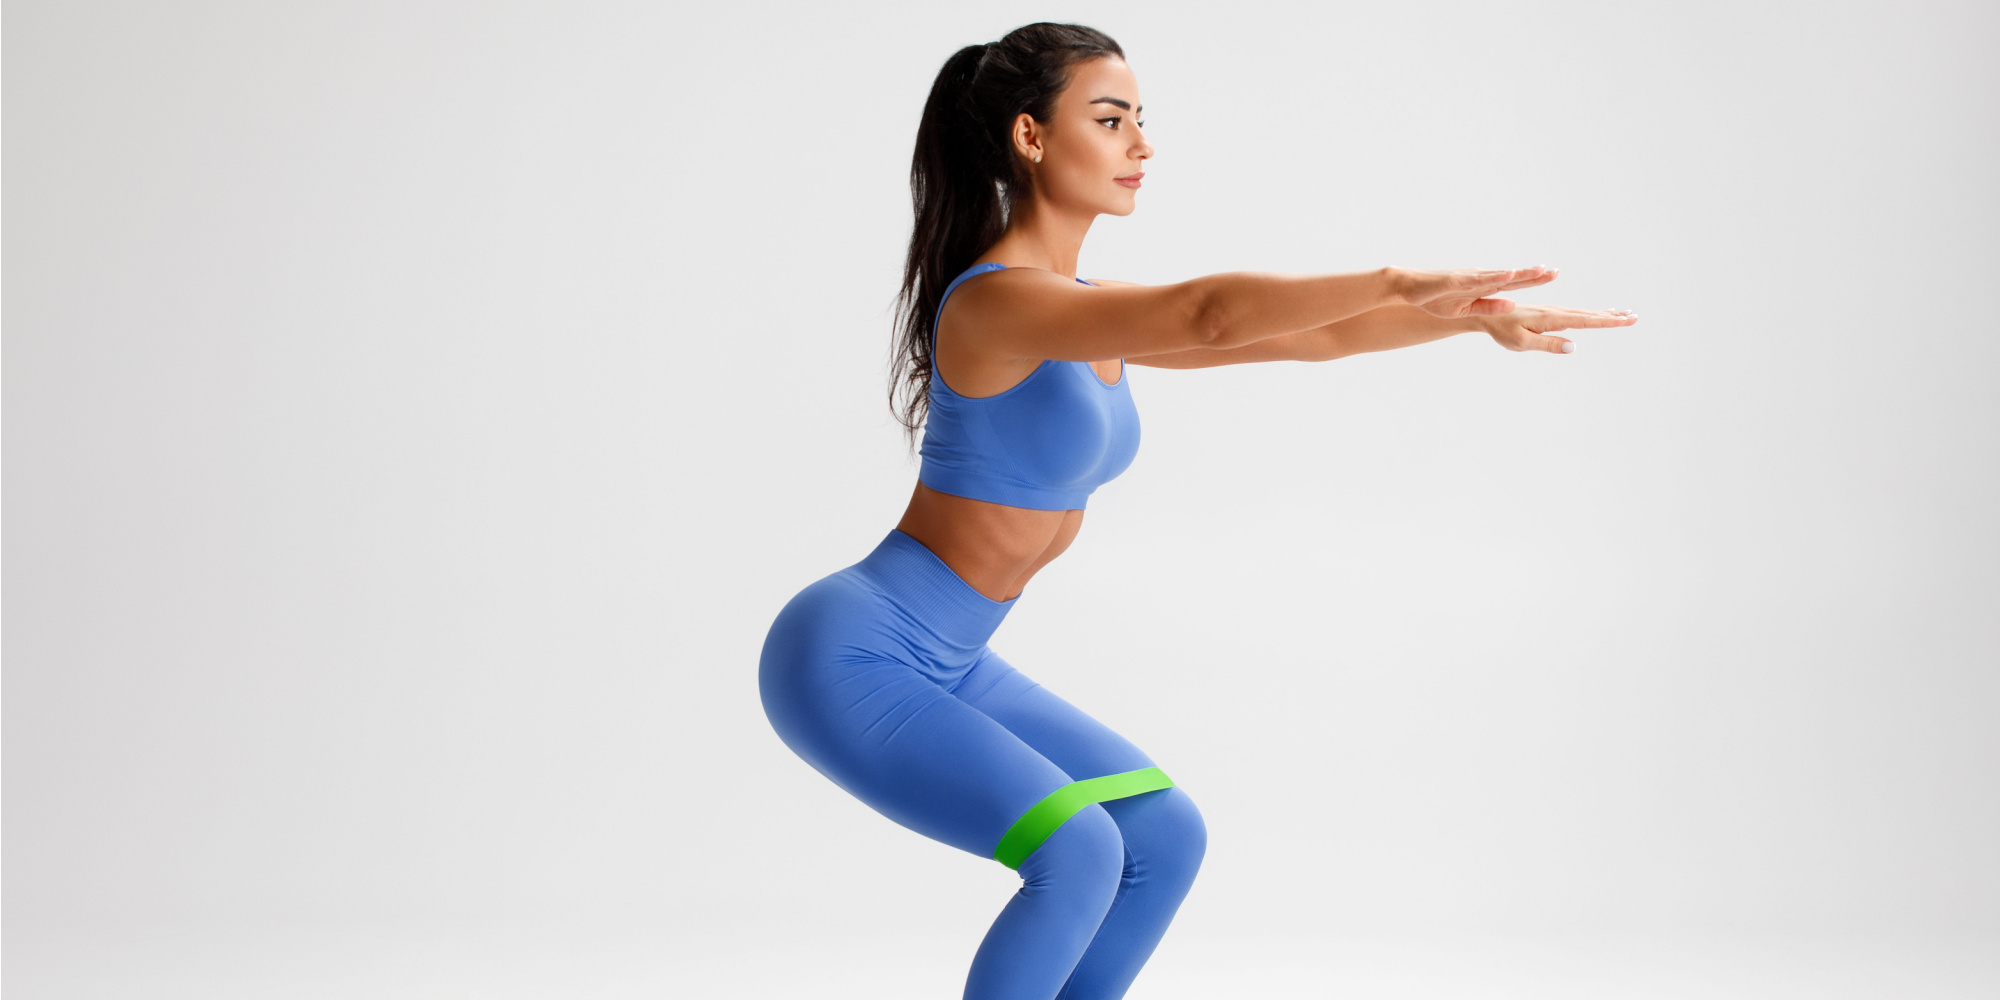 3 Steps You Can Follow to Grow a Bigger Butt